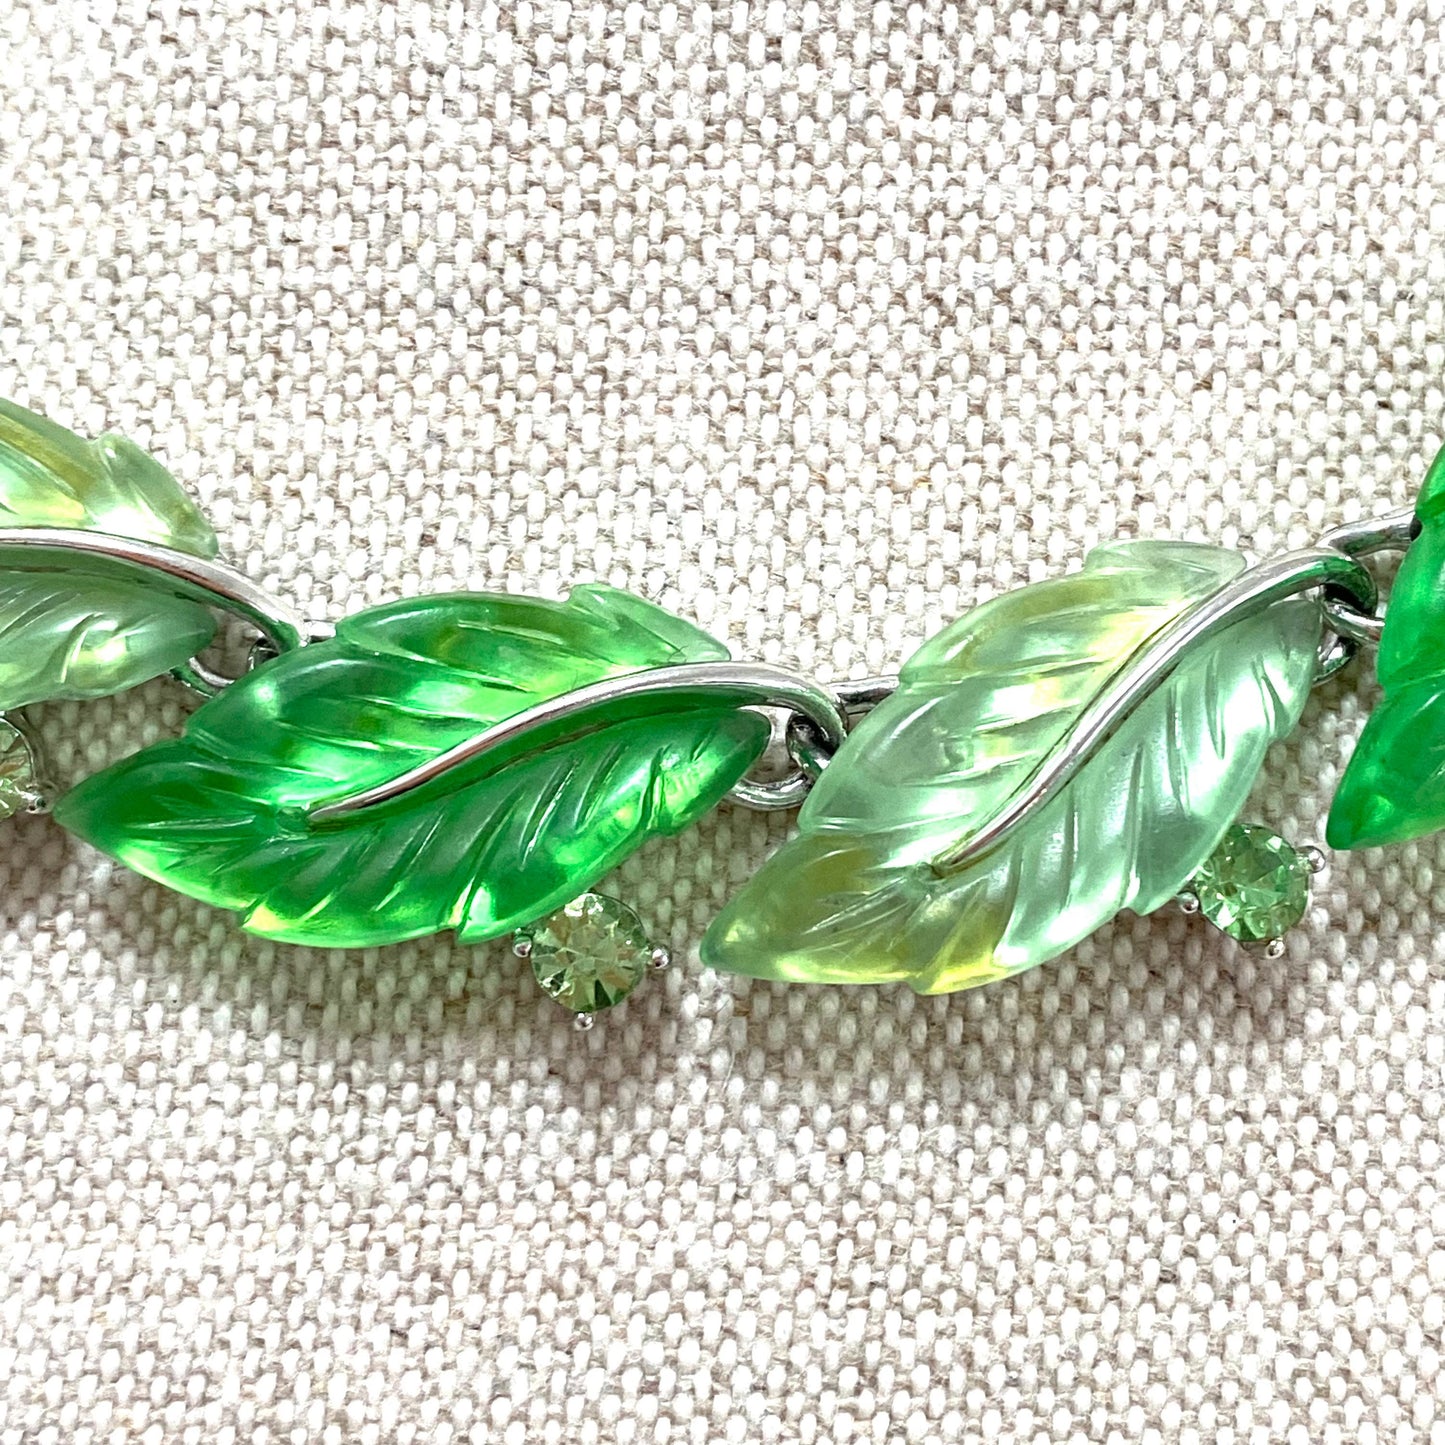 Lisner Lucite Leaf and Chrome Tone Necklace